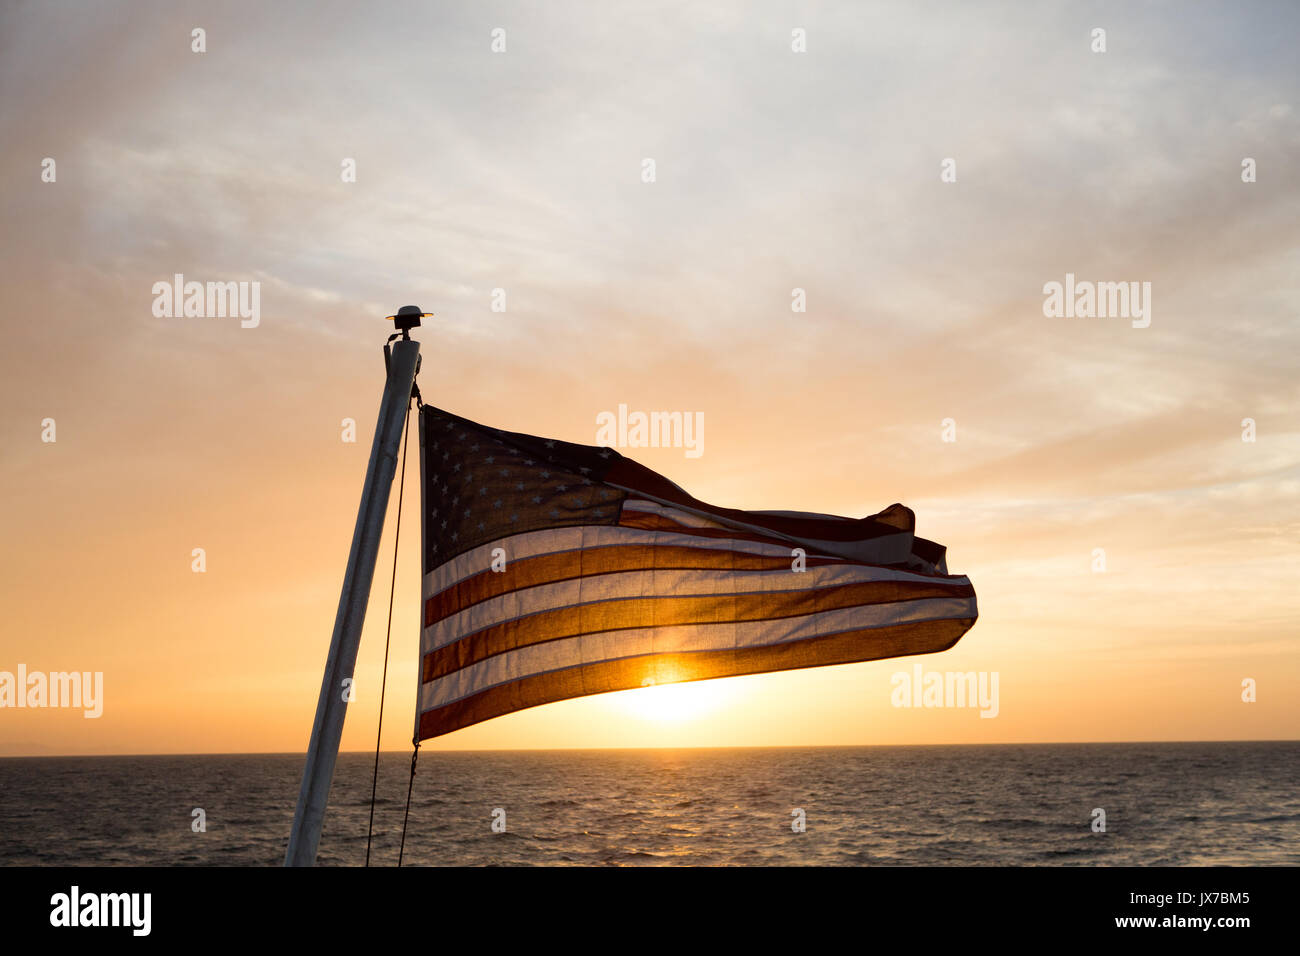 In waters near Isla Coiba National Park, the sun rises and illuminates an American flag that flies from an expedition cruise ship. Stock Photo